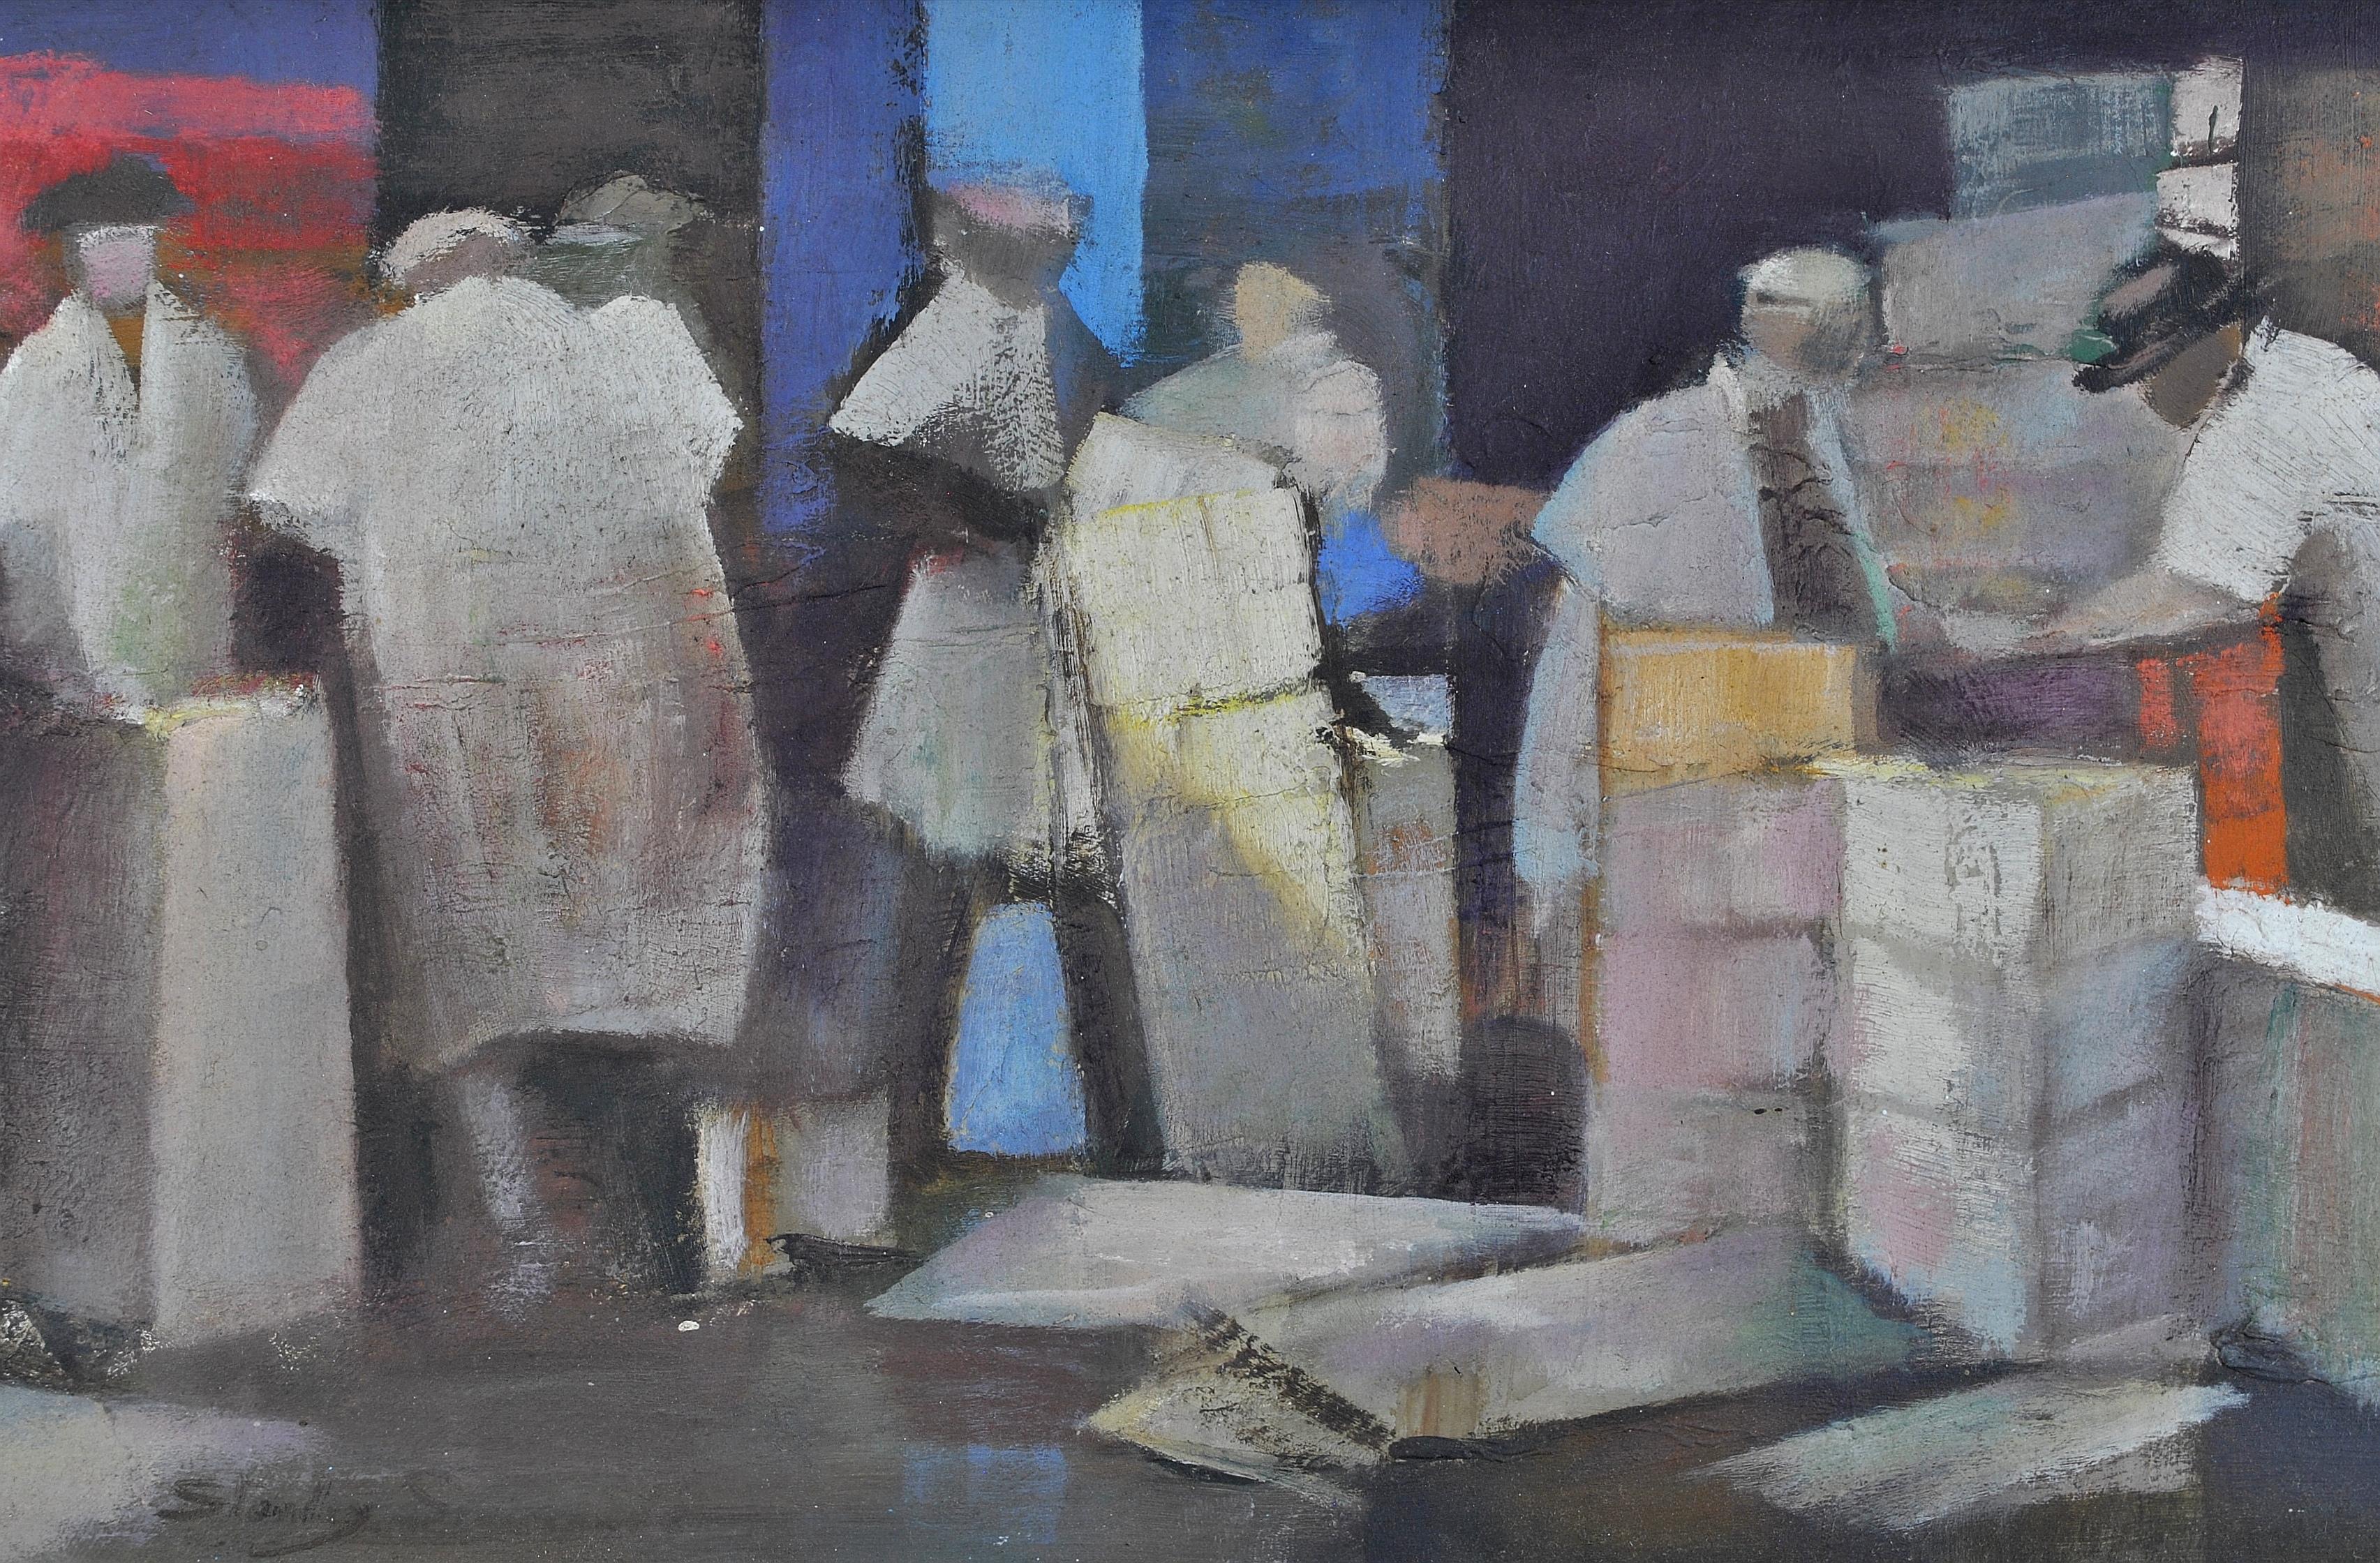 A fine c.1960 oil on board by Stanley Simmonds depicting the famous white coated porters at the original Billingsgate Market in the City of London. 

This painting comes from an important series of Billingsgate Market paintings that the artist